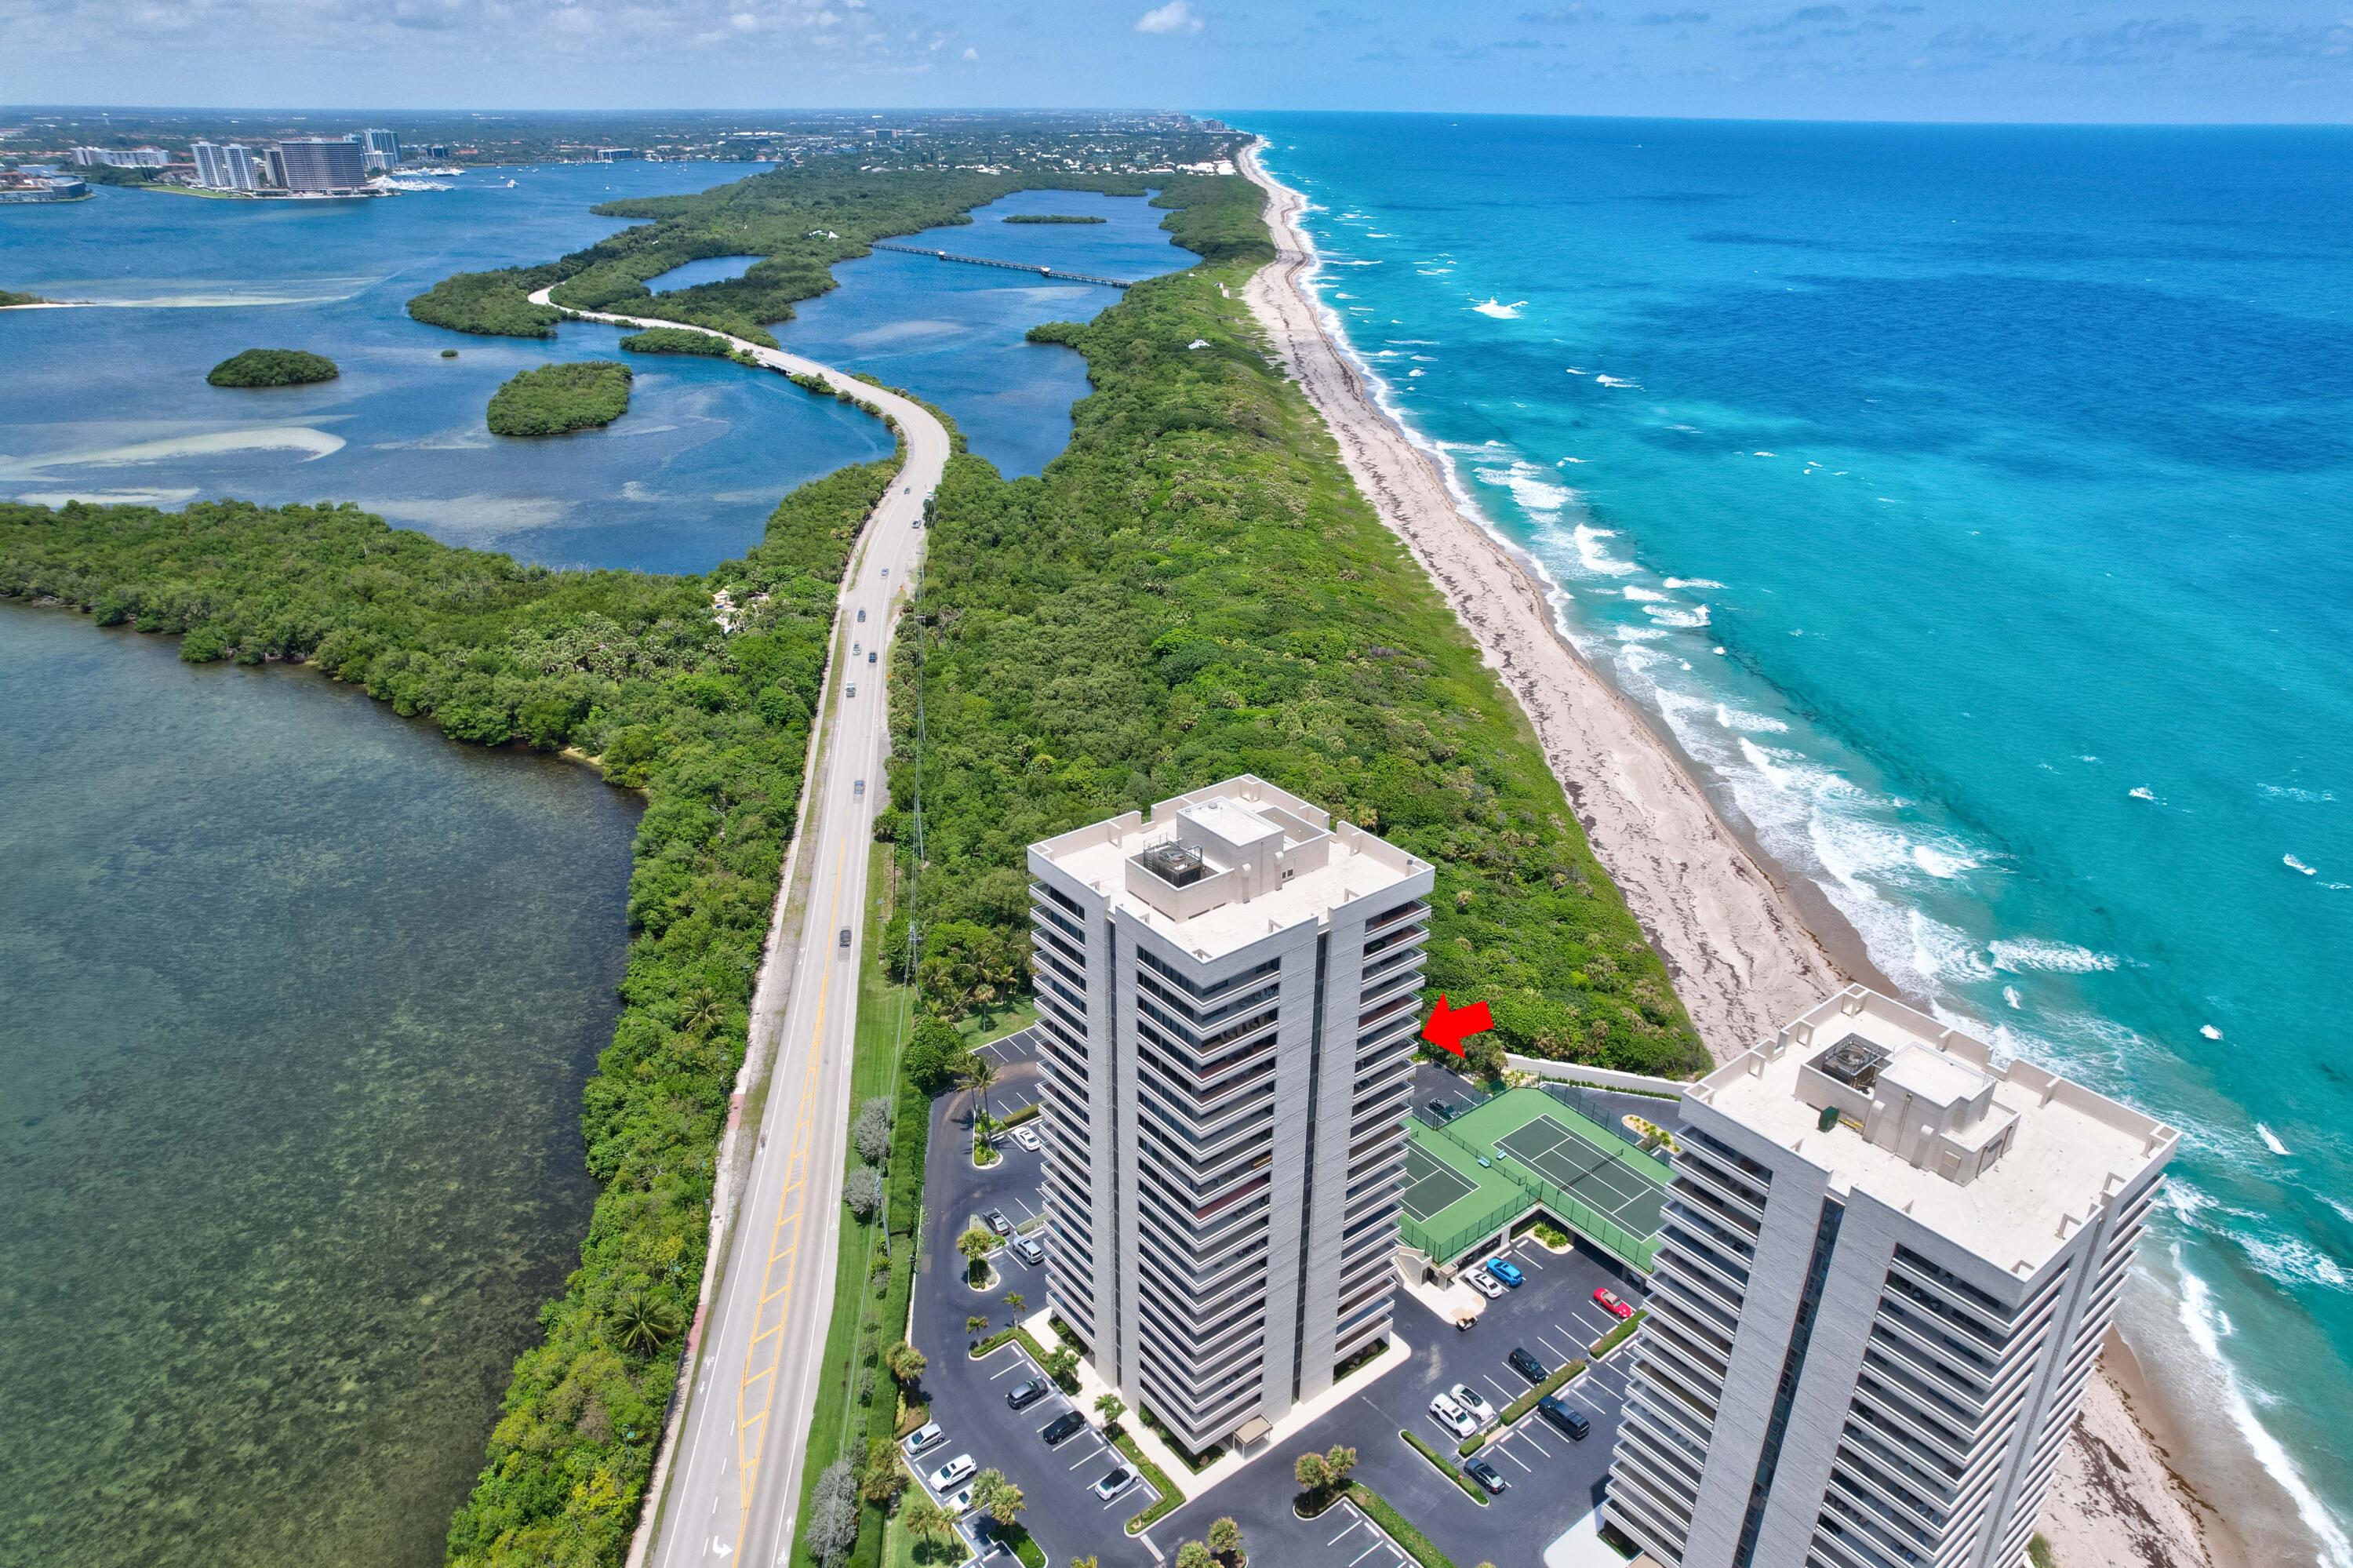 Unbelievably STUNNING unobstructed, panoramic views from the Atlantic Ocean to the IntraCoastal Waterway & MacArthur State Park - enjoy the very best of both worlds with majestic views of the sunrise, sunset and everything in between! Tasteful use of glass sliders & mirrored walls expand the views throughout the home. Only one owner who has lovingly cared for and enjoyed the unit as her second home. Pristine and move-in ready! Enjoy Water Glades' amenities which include a pool, tennis, patio grill, fitness center and a quiet beach away from hotels. Ideal location, just a short drive to shopping & fine dining in Palm Beach Gardens & Jupiter, 15 minutes to PBI airport, Palm Beach and more! Water Glades has 24x7 manned gate & Manager onsite. If you're looking for paradise, you just found it!